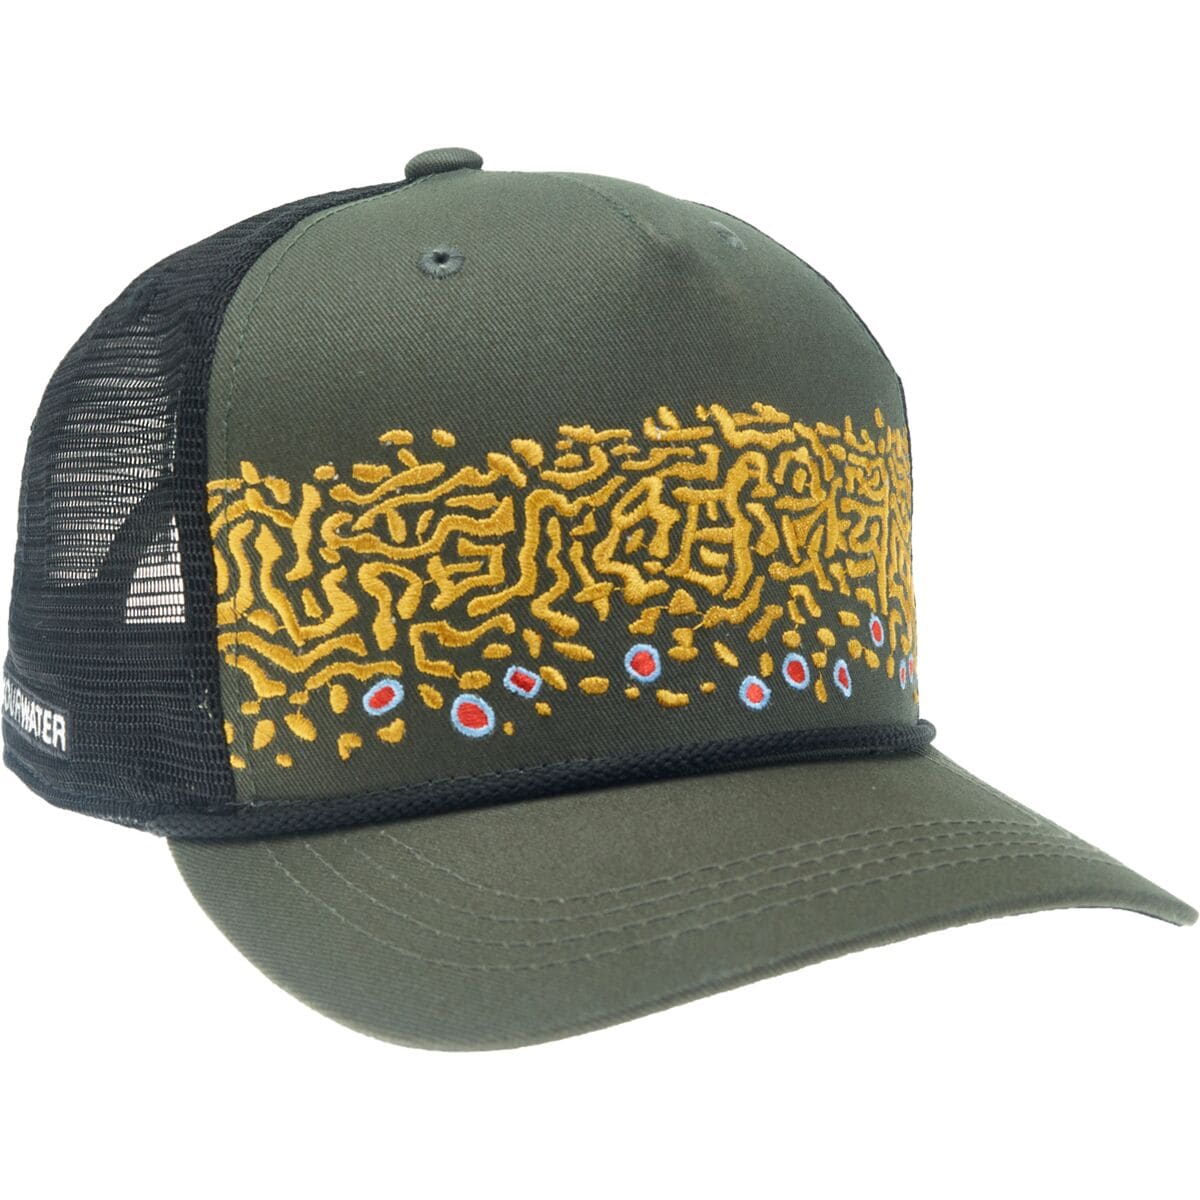 Rep Your Water Brook Trout Skin 2.0 5-Panel Trucker Hat